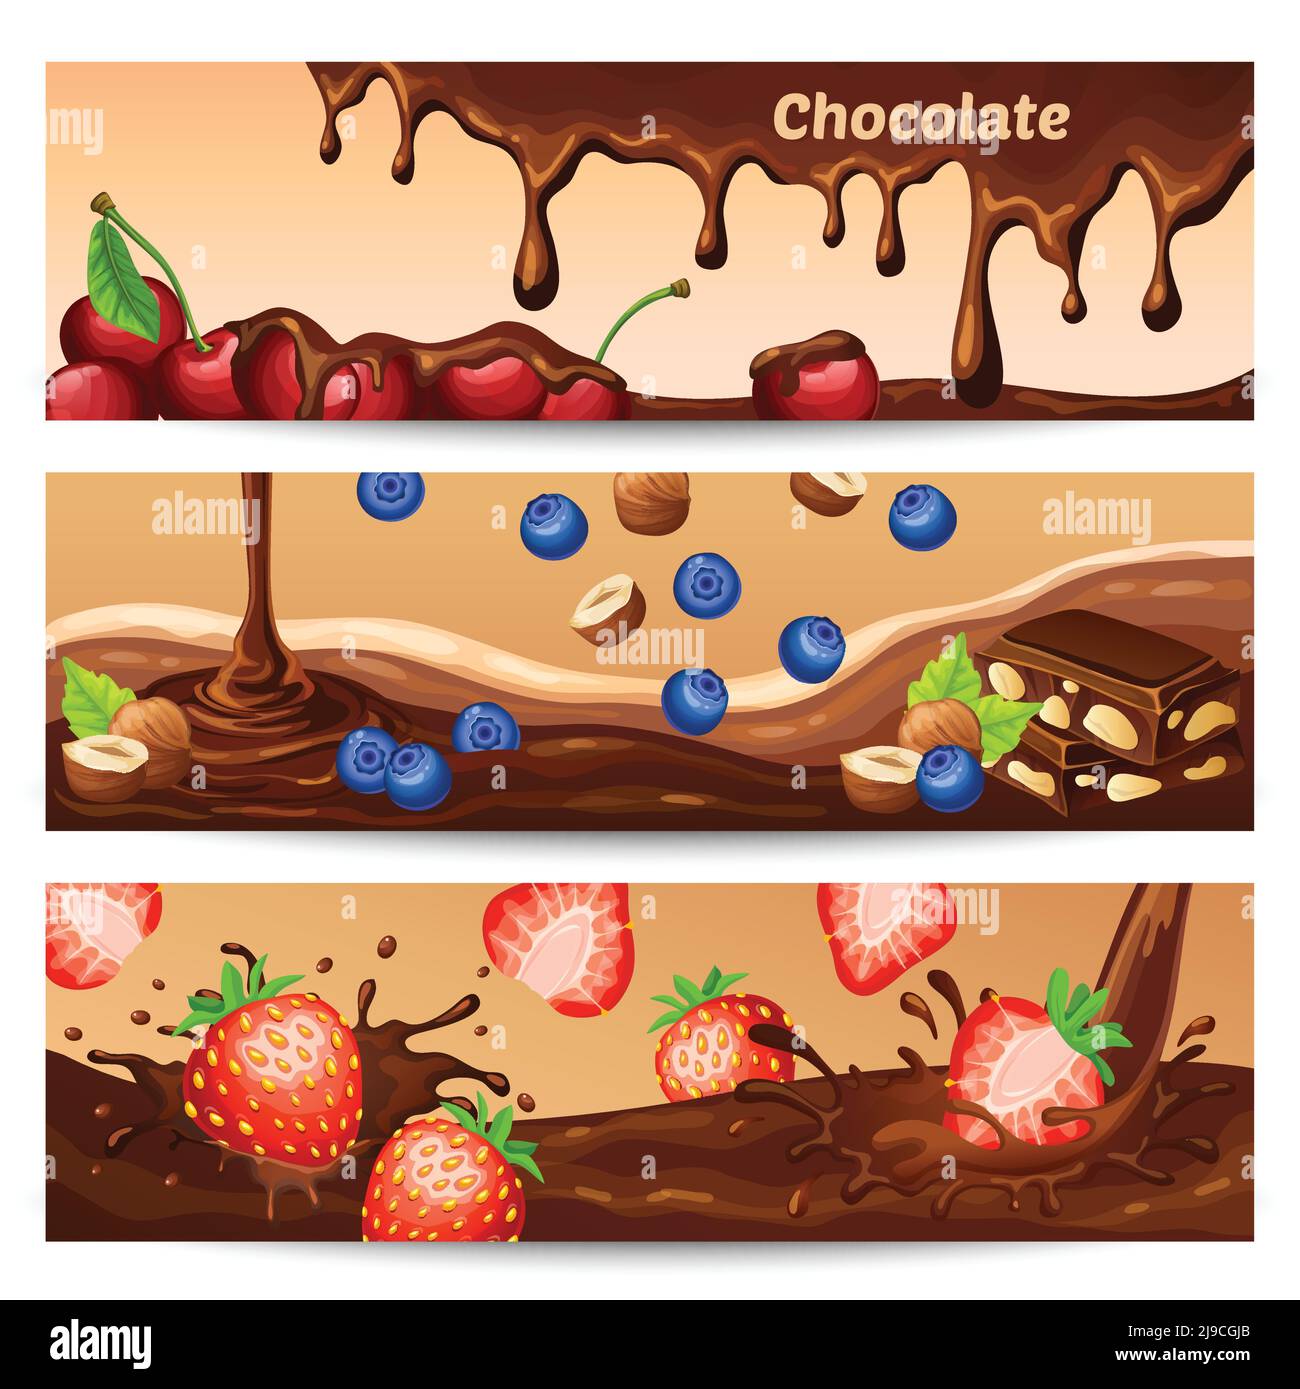 Cartoon chocolate horizontal banners with drops flow splashes pieces cherries bilberries strawberries and hazelnuts vector illustration Stock Vector